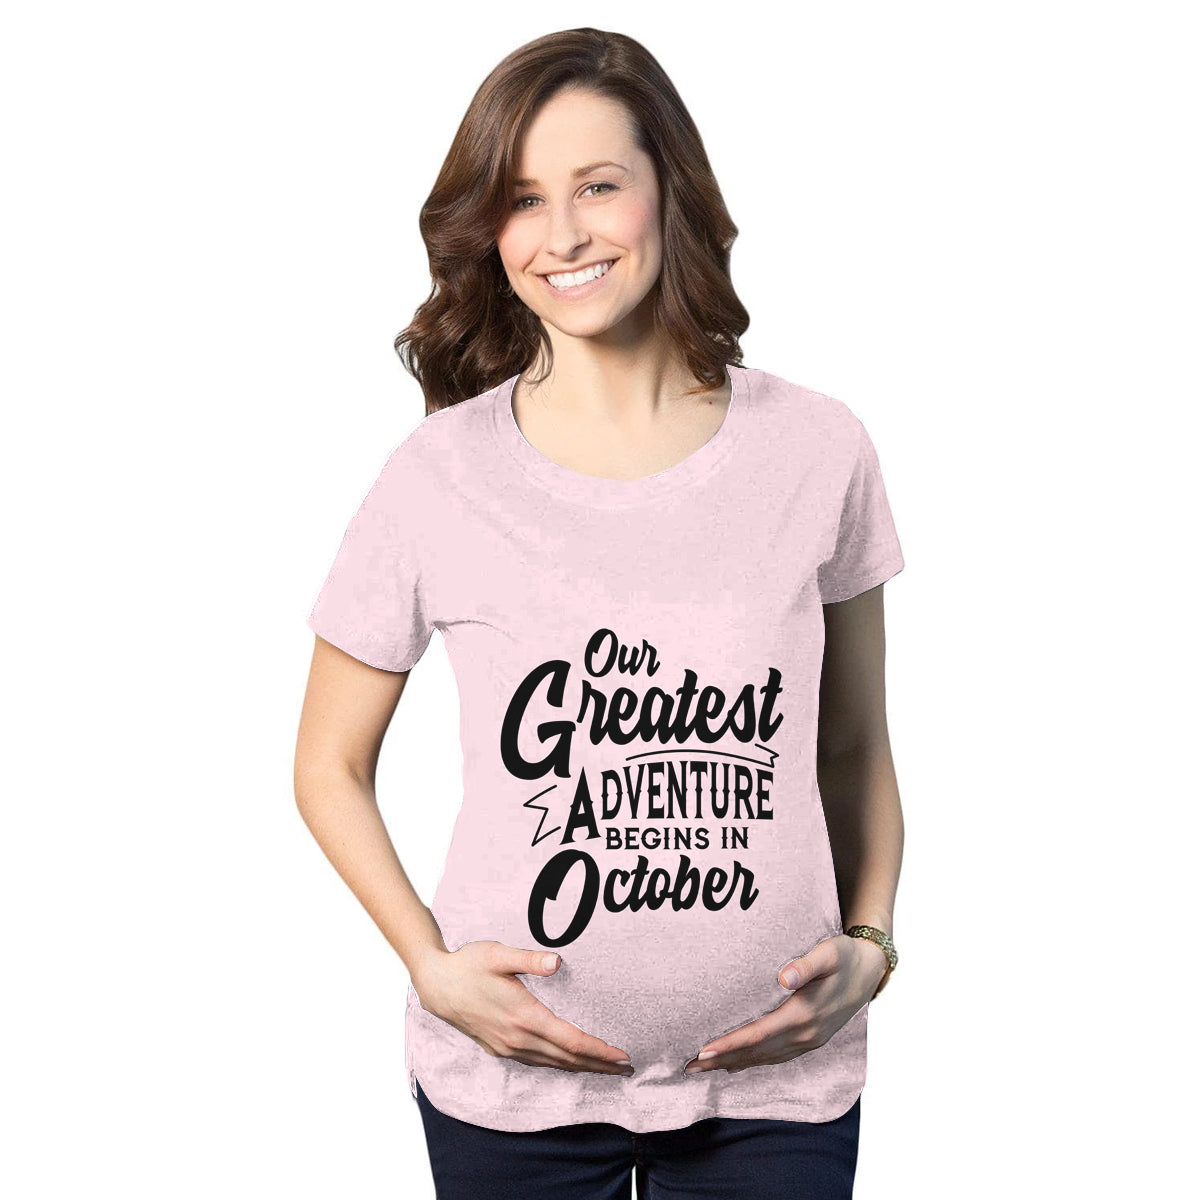 Our Greatest Adventure Begins in October Maternity T-Shirt